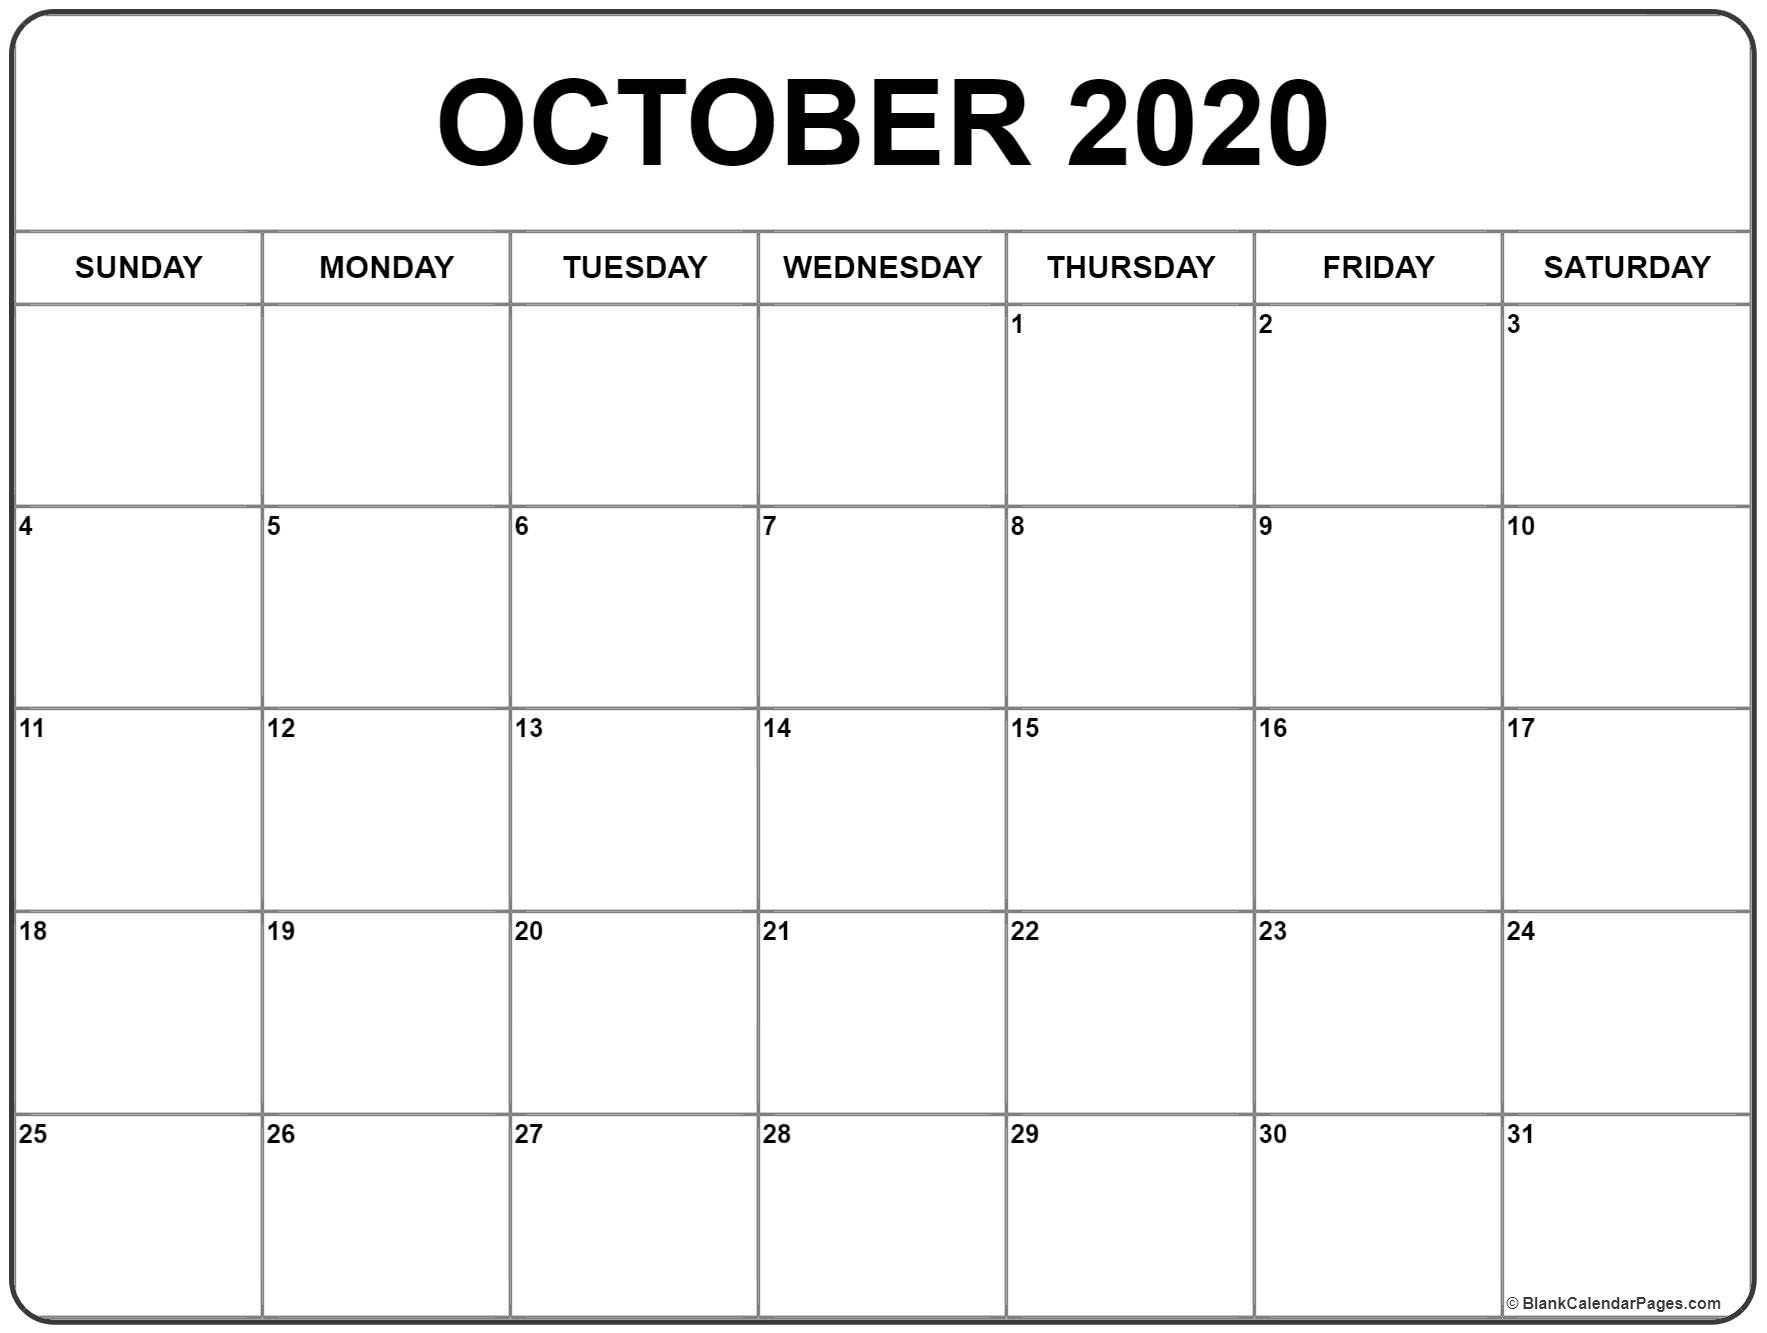 October 2020 Calendar | Free Printable Monthly Calendars-October 2020 Monthly Calendar Printable